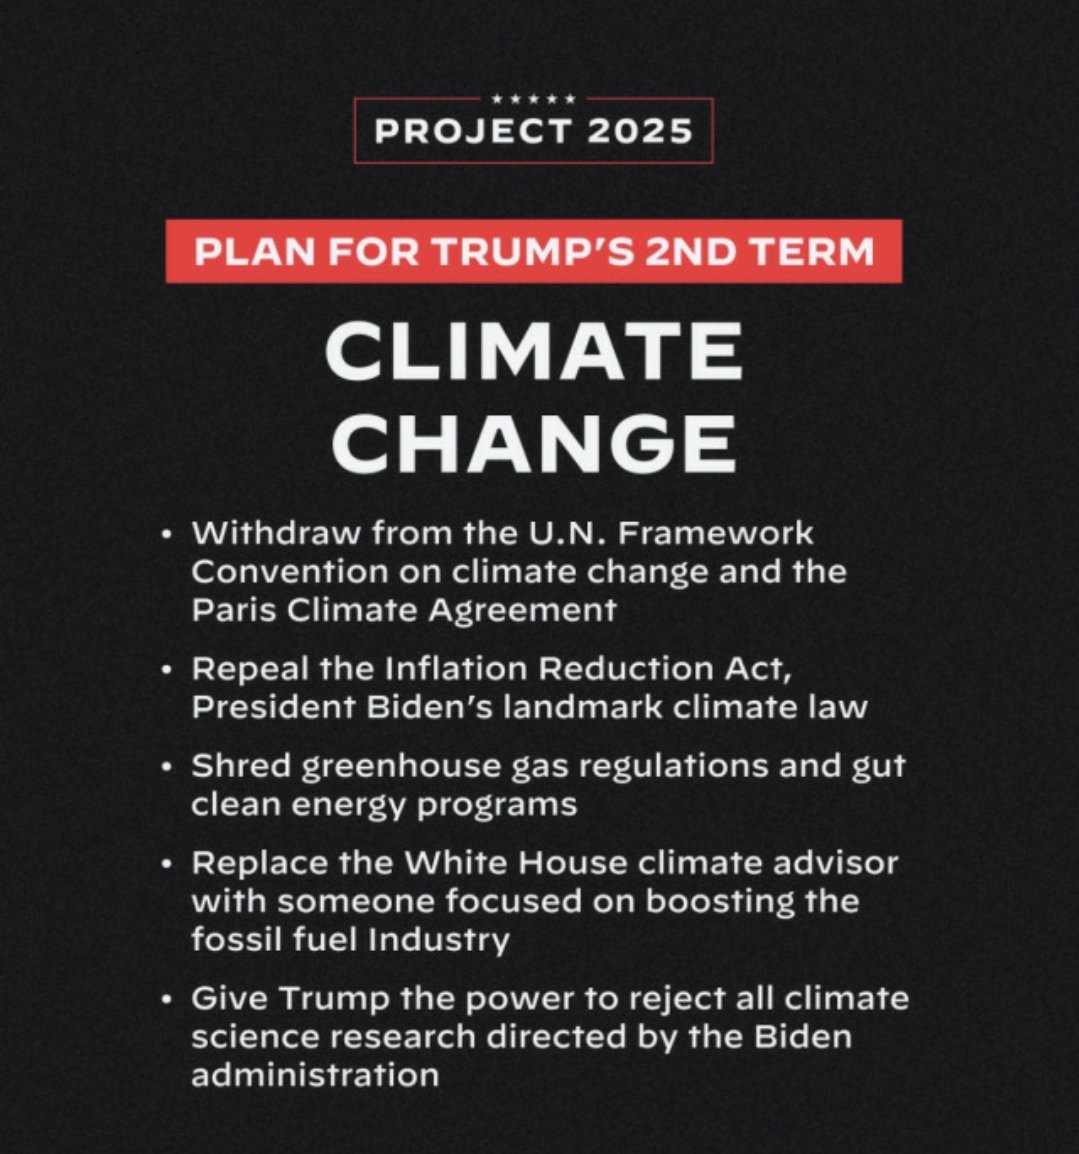 #DemVoice1 Nearly all of the Project 2025 mandates target the demise of our way of life for almost 248 years, the improvements and changes made throughout those years. Now, with this mandate, they are working toward destroying our land, air, and water. Destruction of our world…